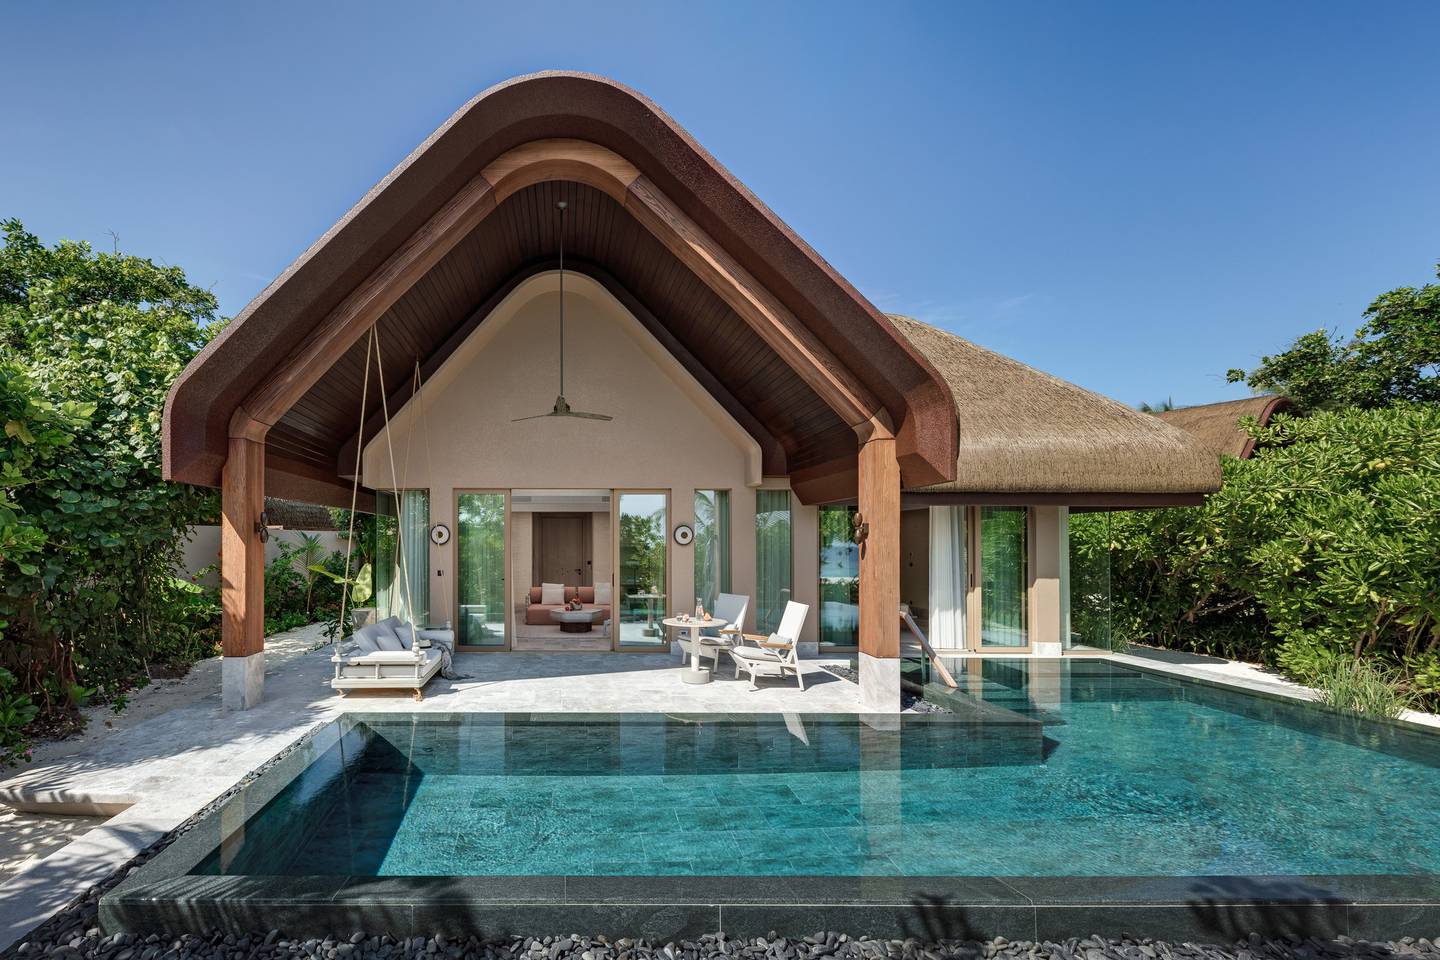 Each of the villas, designed in flowing lines and curves, has a private pool and a dedicated butler